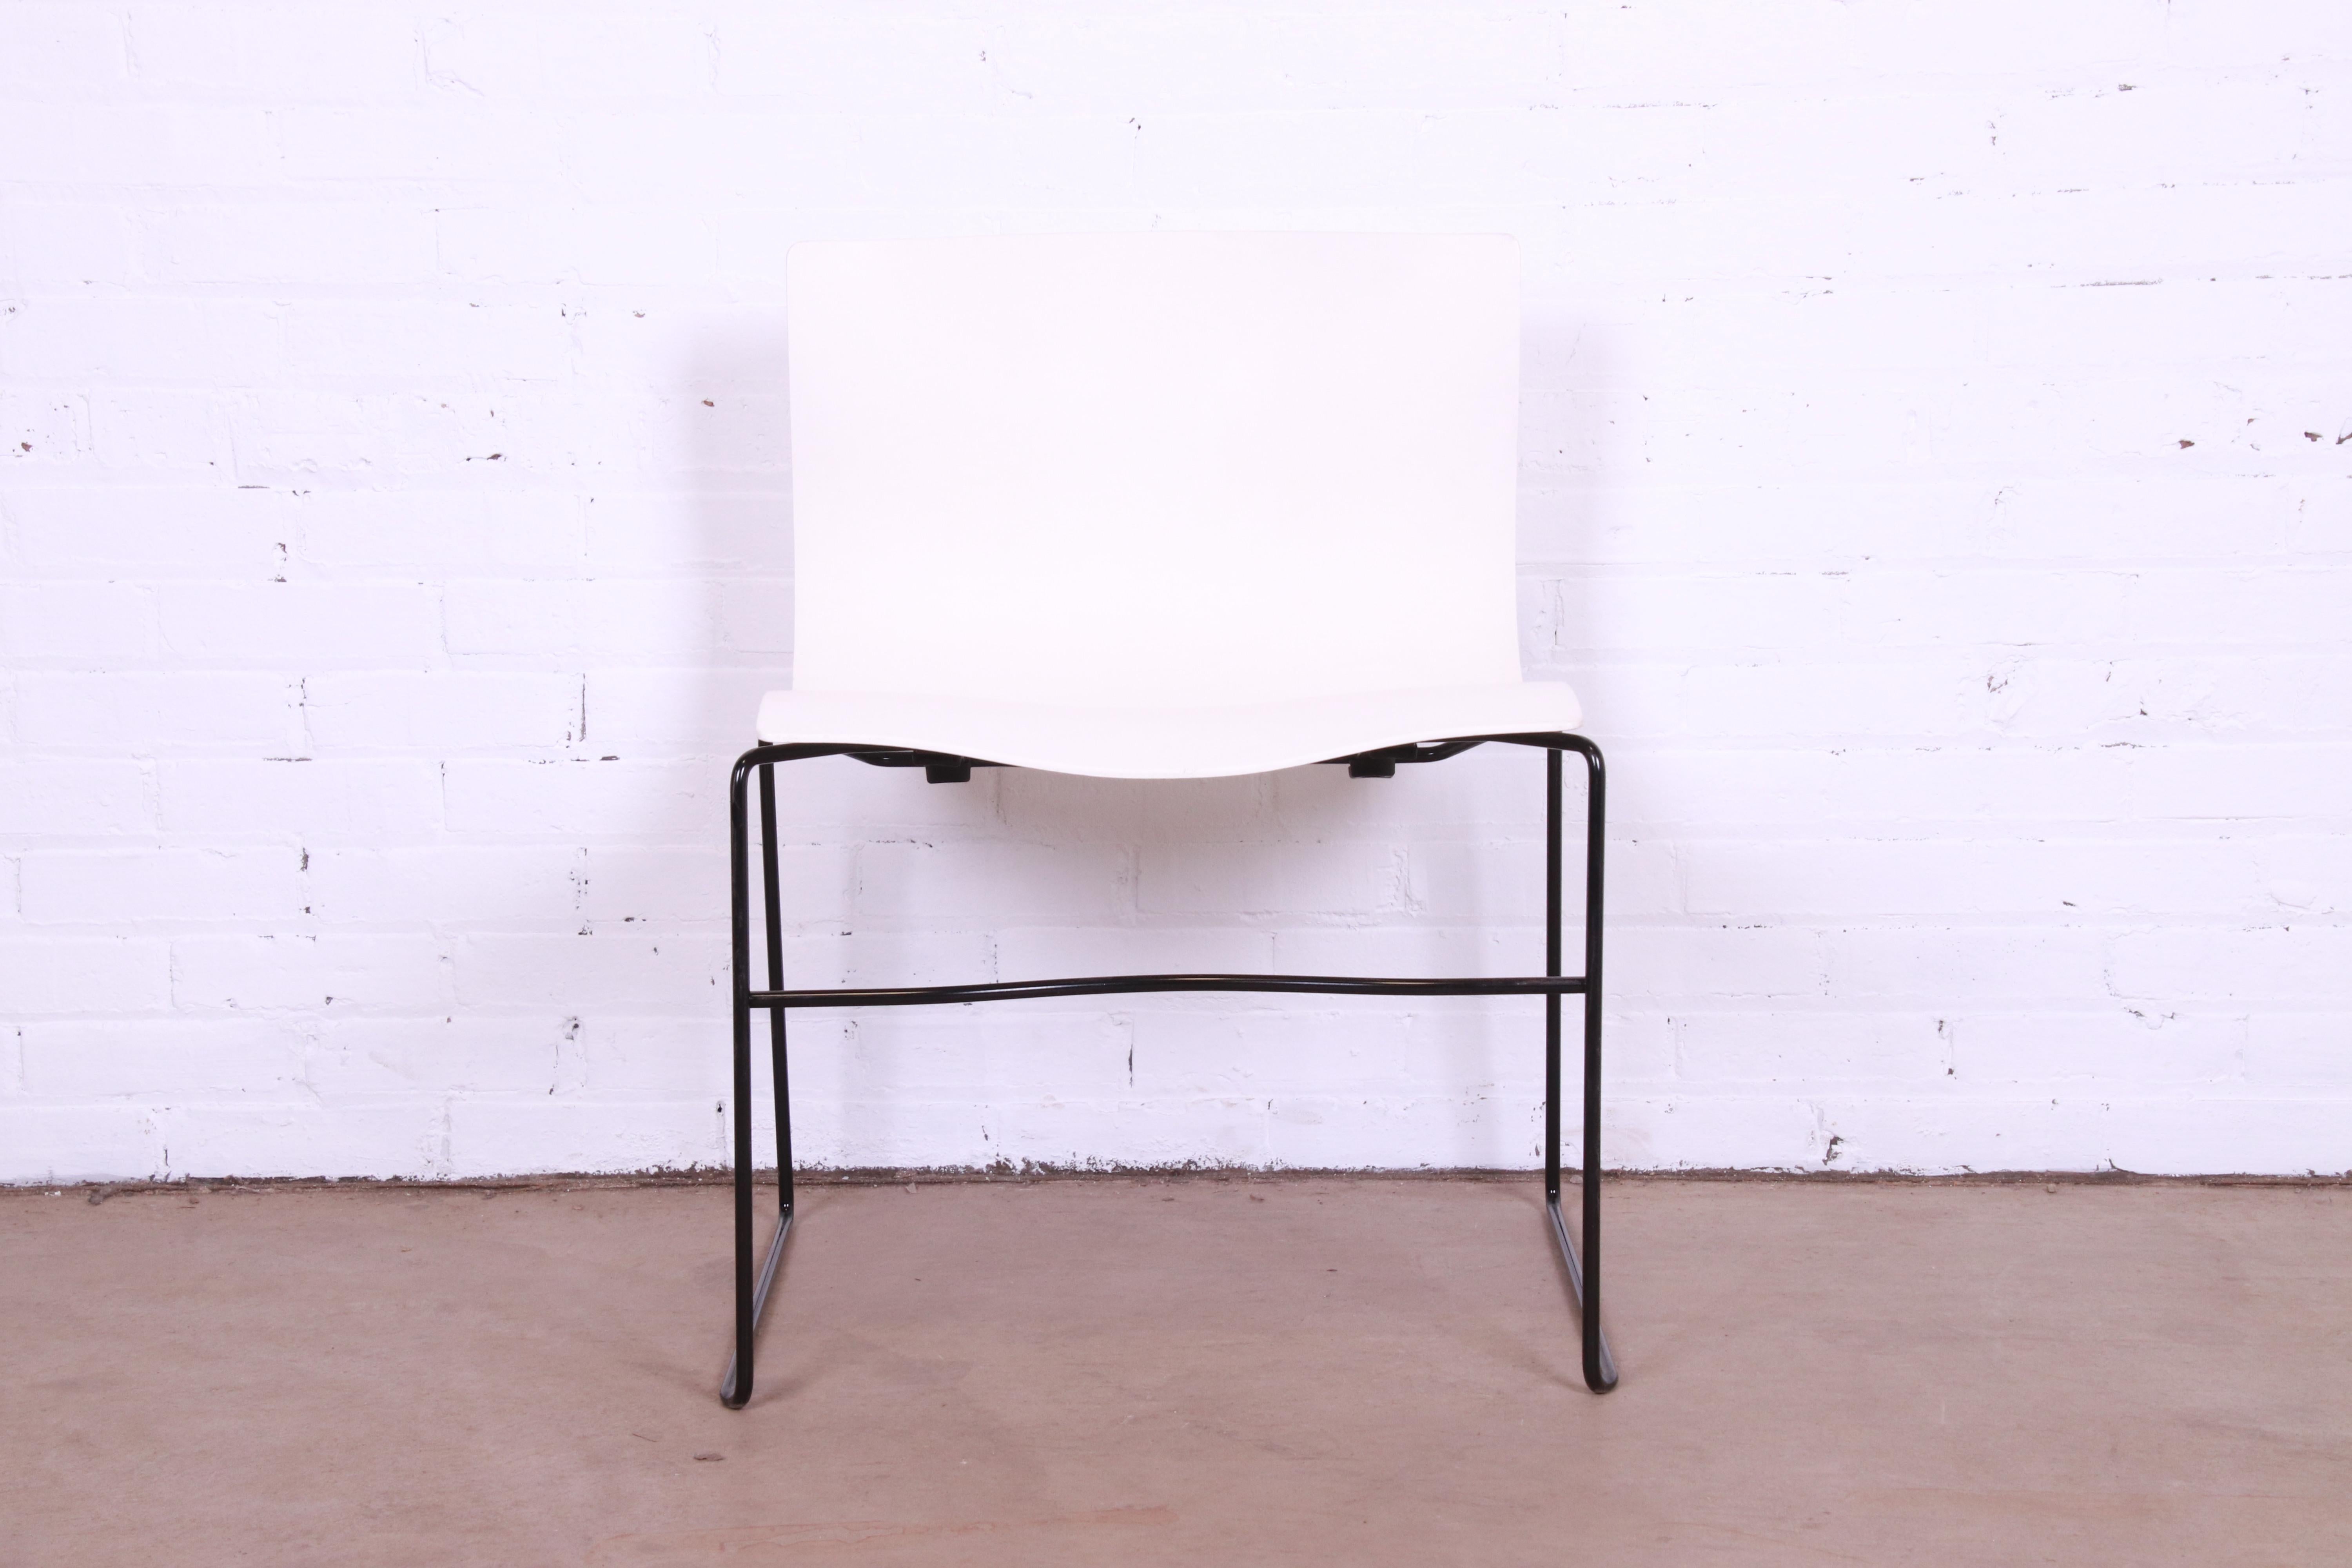 American Massimo Vignelli for Knoll Postmodern Handkerchief Chair, 7 Available For Sale